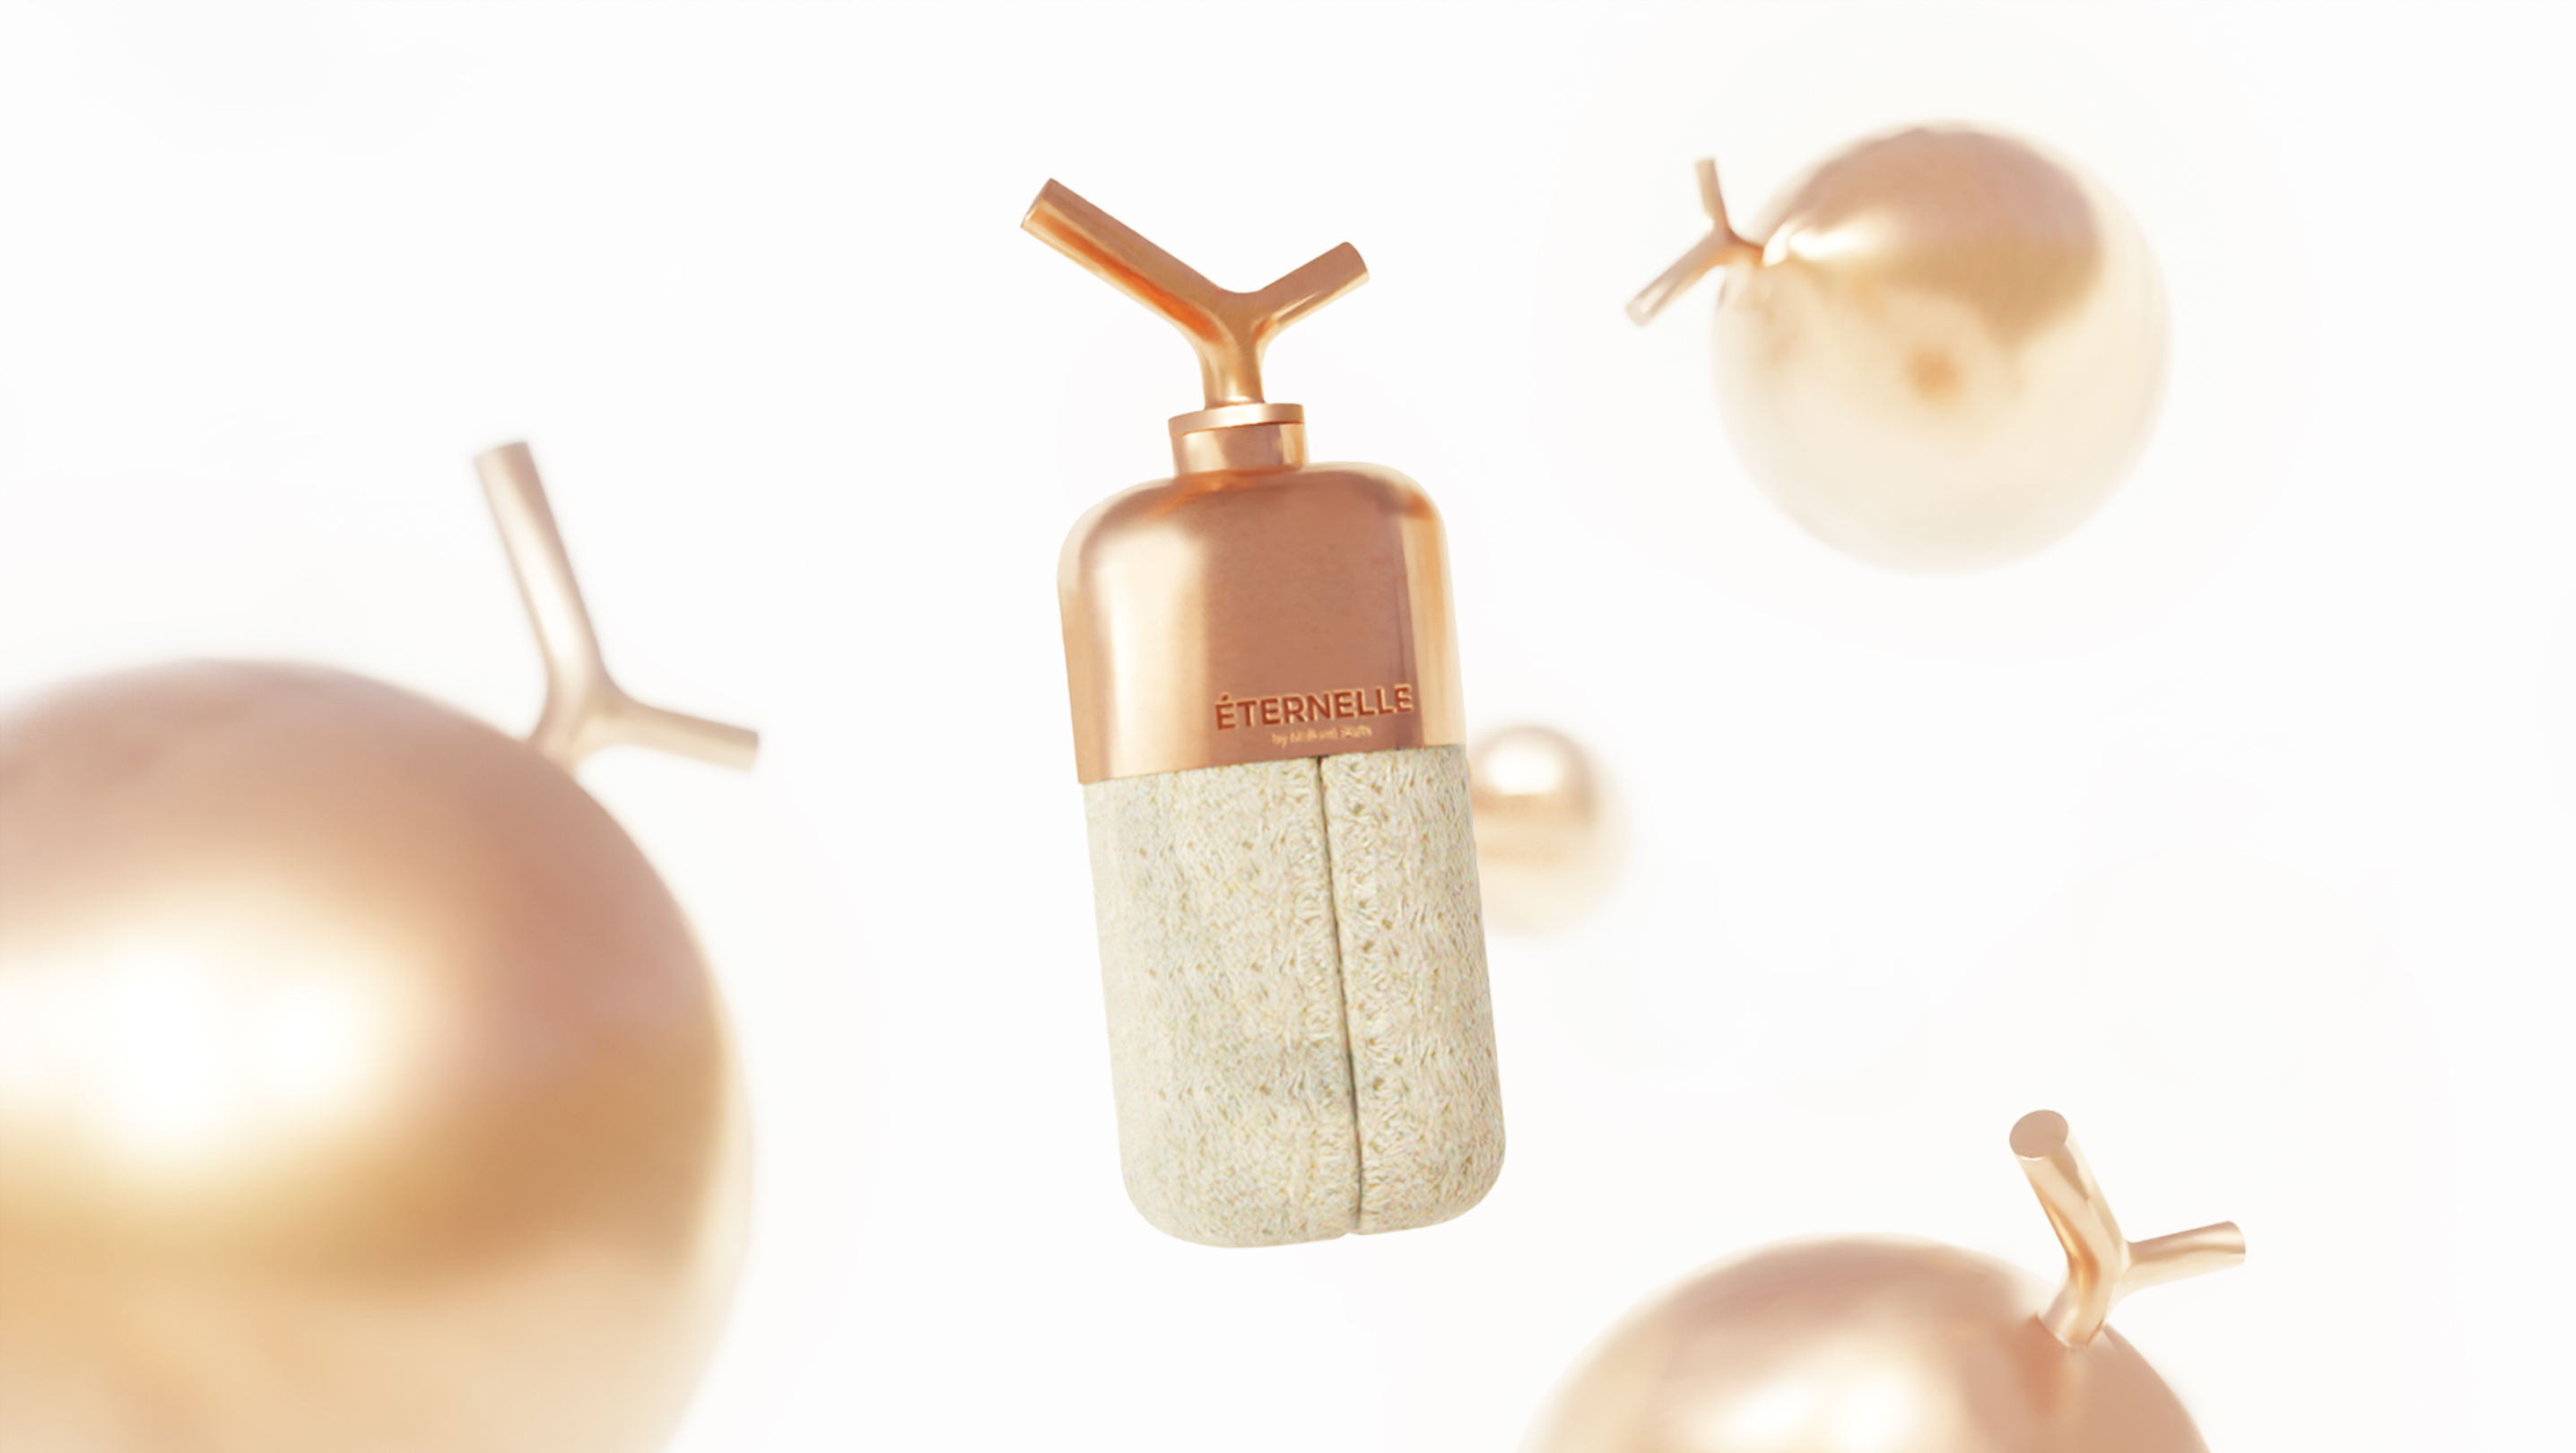 MUSE Design Winners - Eternelle - Refillable Sustainable Packaging from Mushrooms